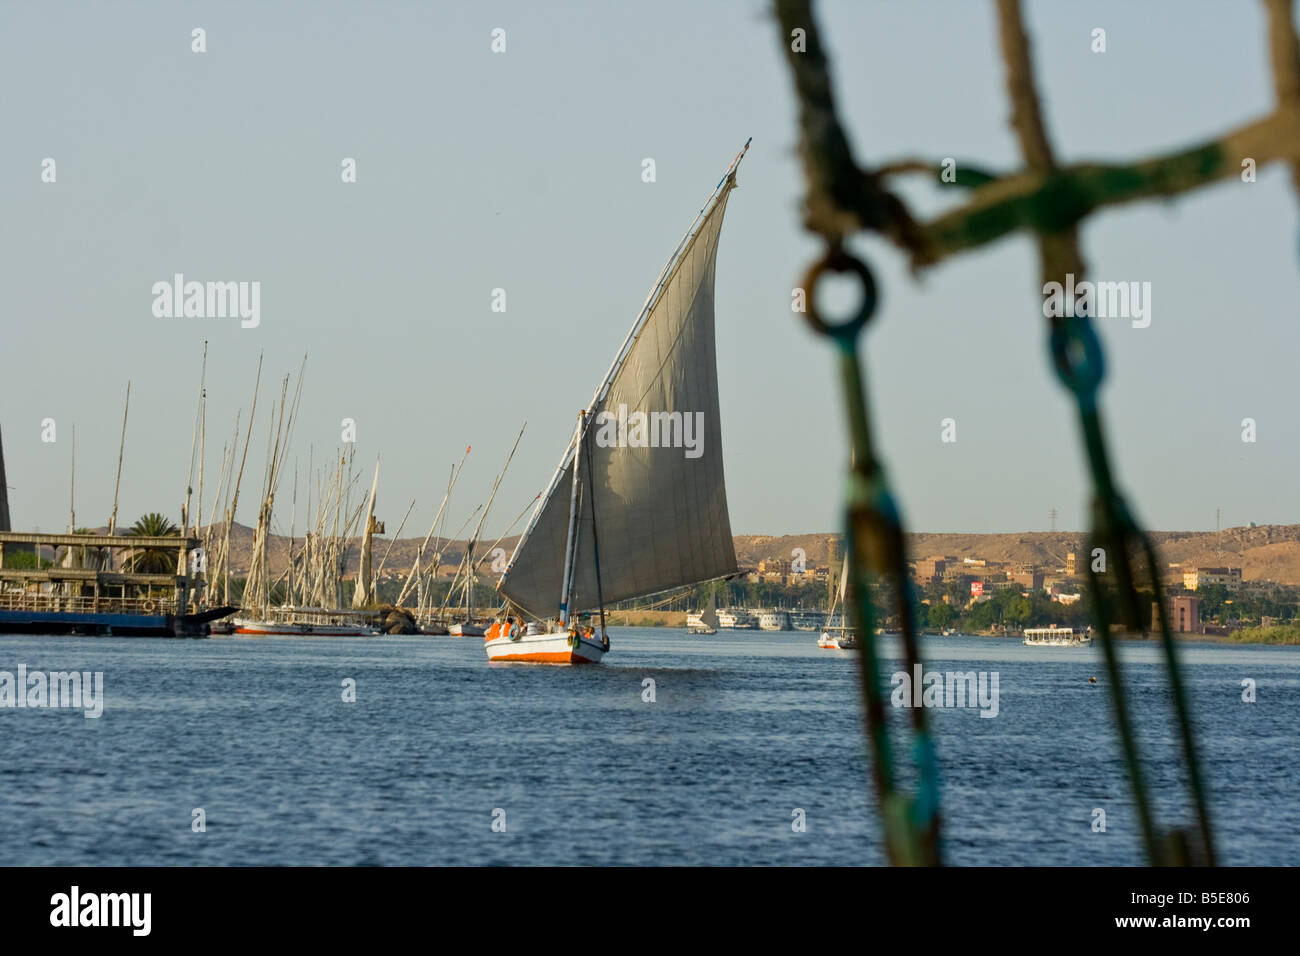 Felucca Sailboats on the Nile River in Aswan Egypt Stock Photo